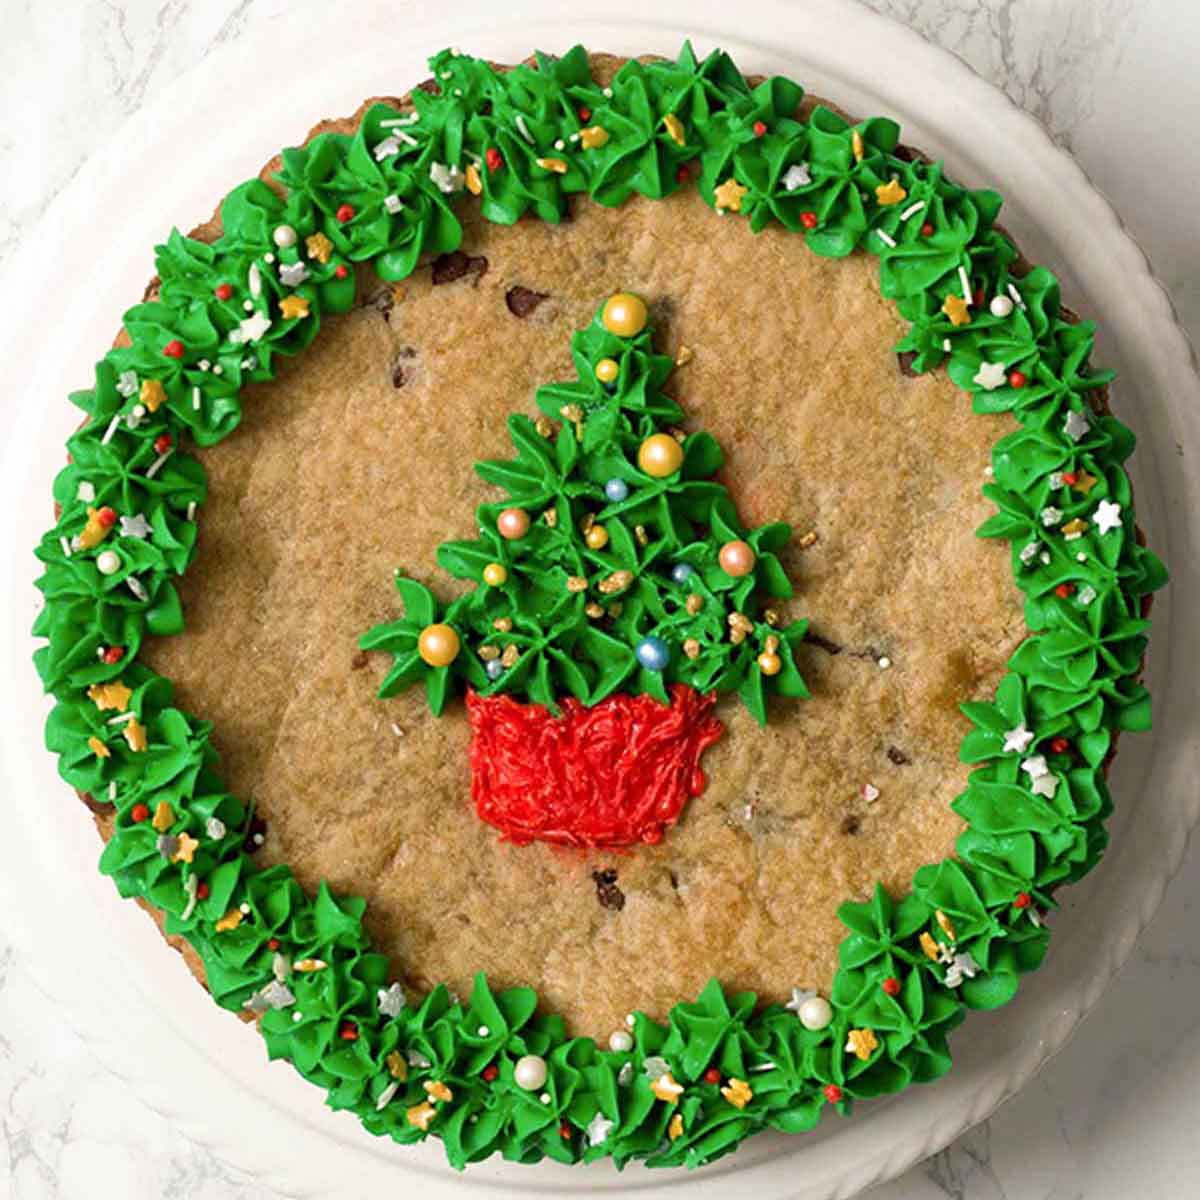 Vegan Cookie Cake With Christmas Icing On Top